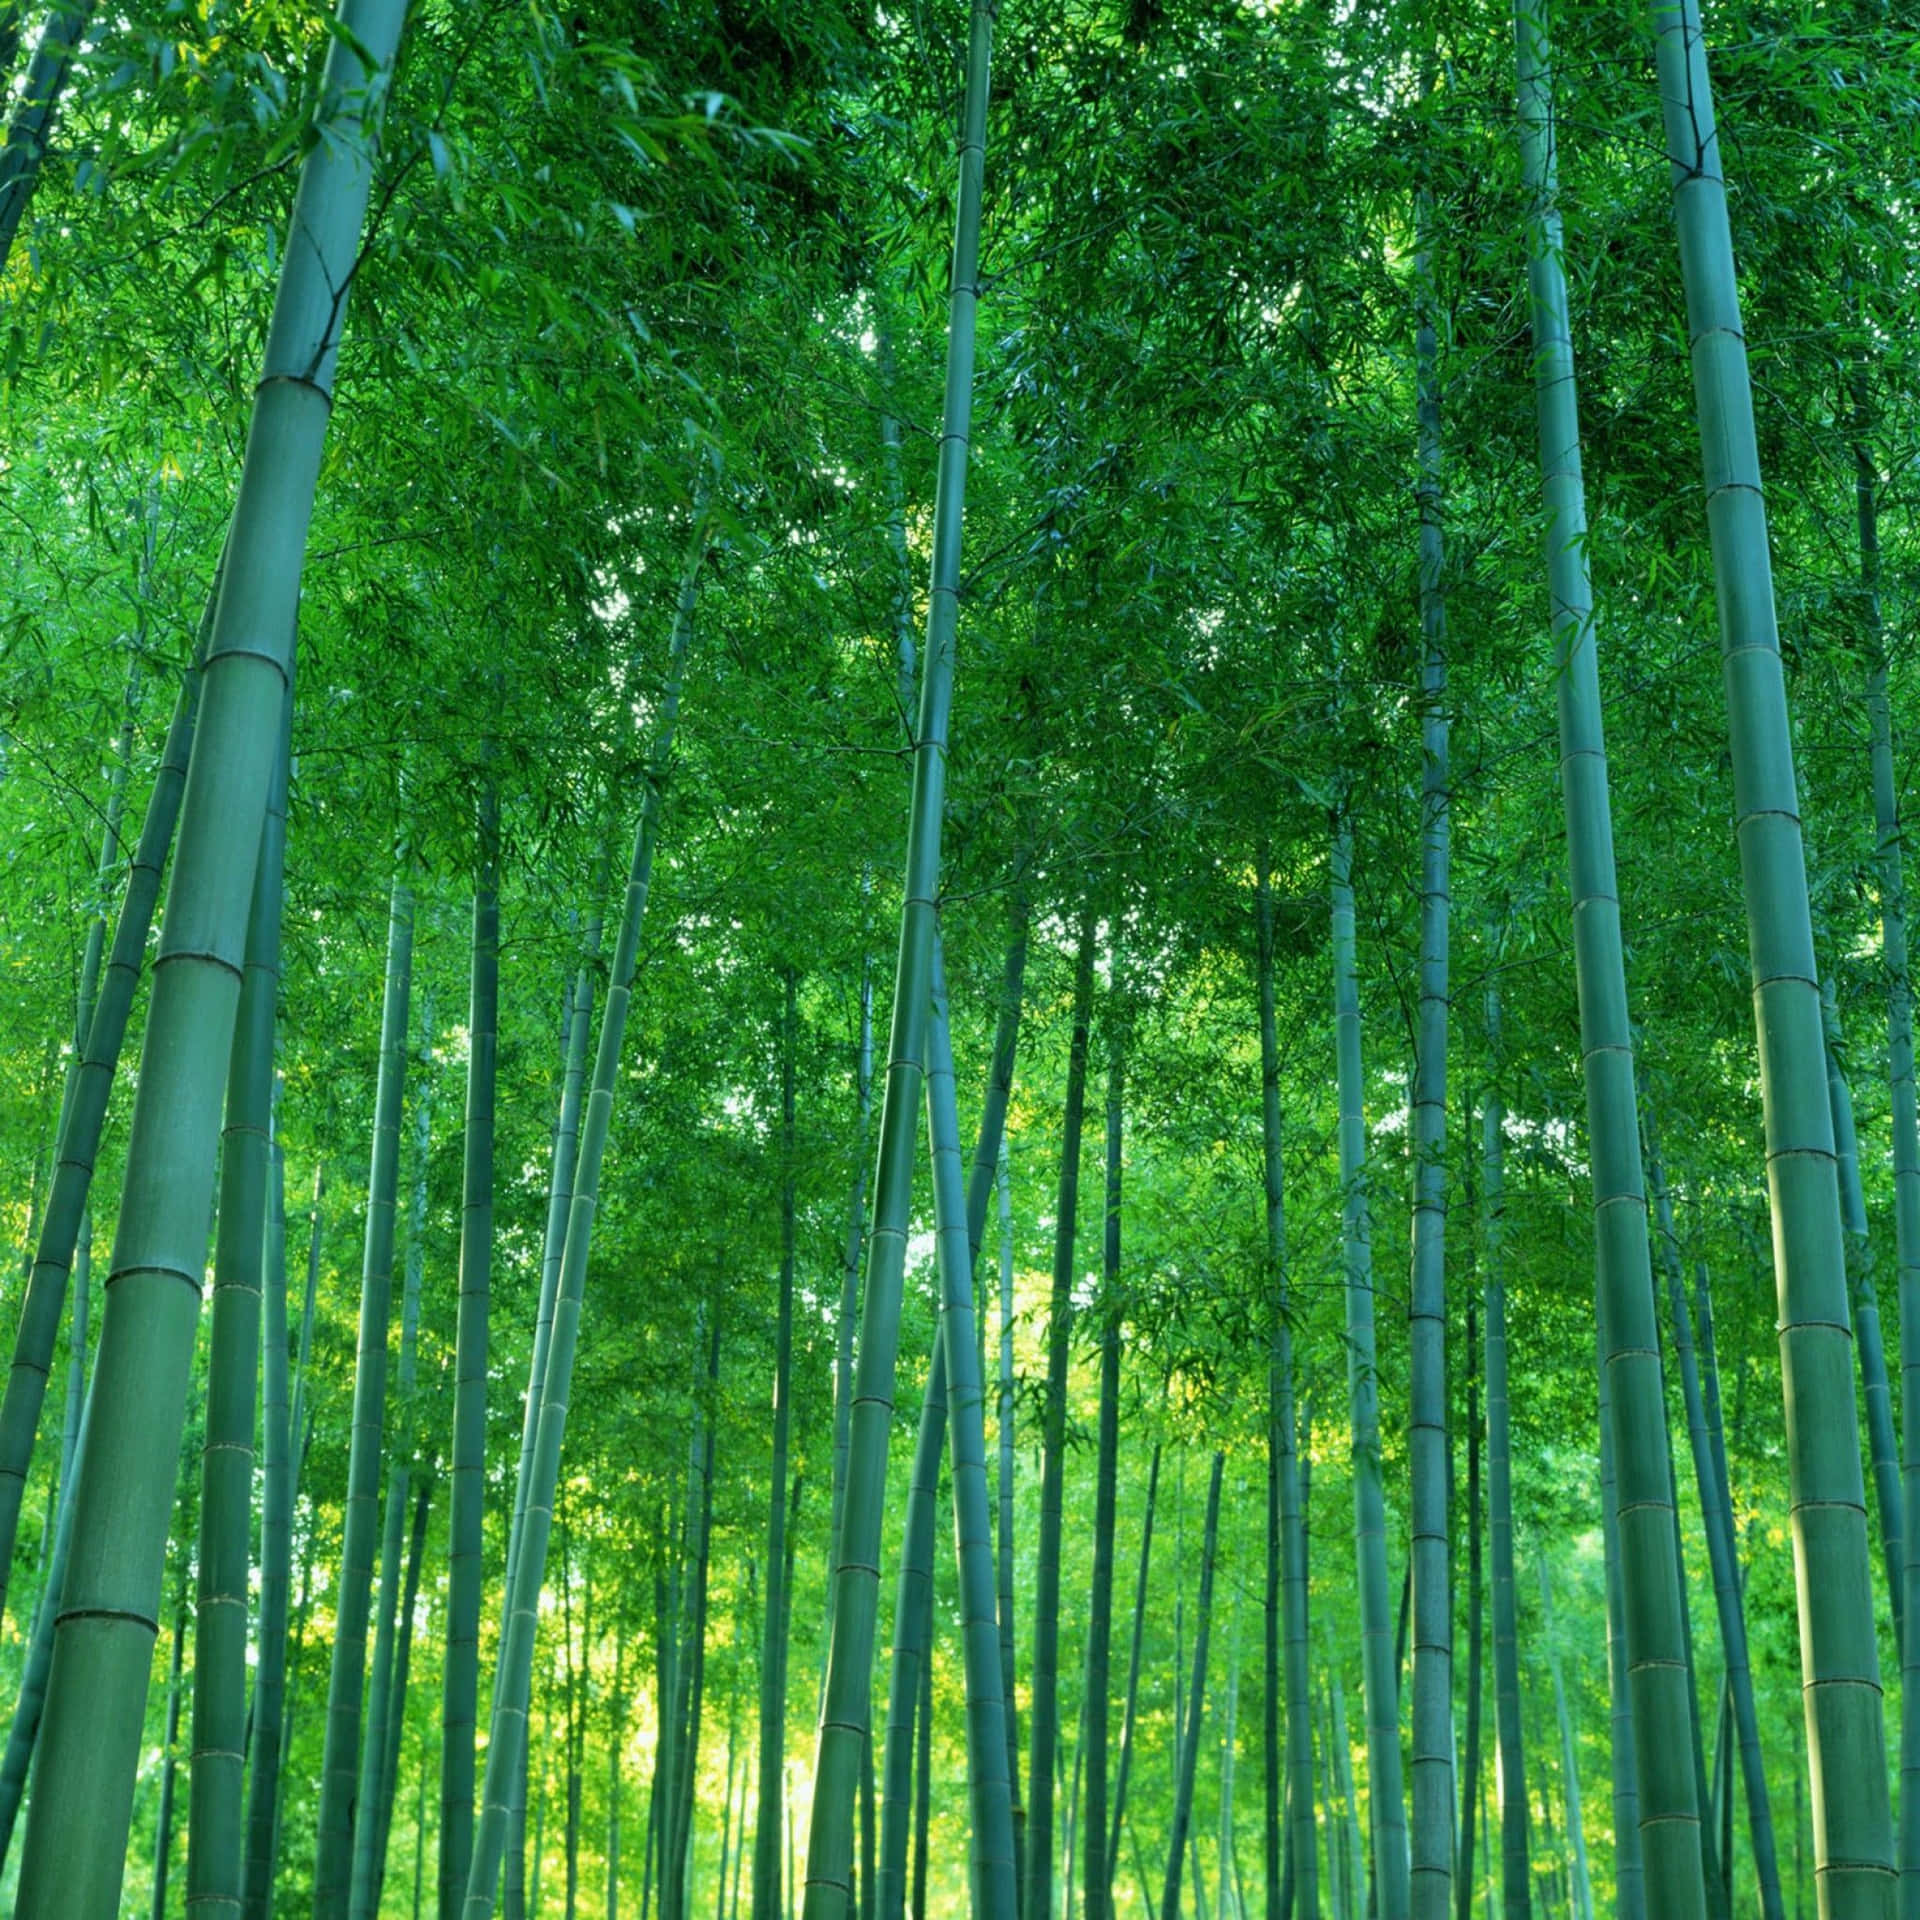 Forest of Tranquility: Green Bamboo Thicket Wallpaper